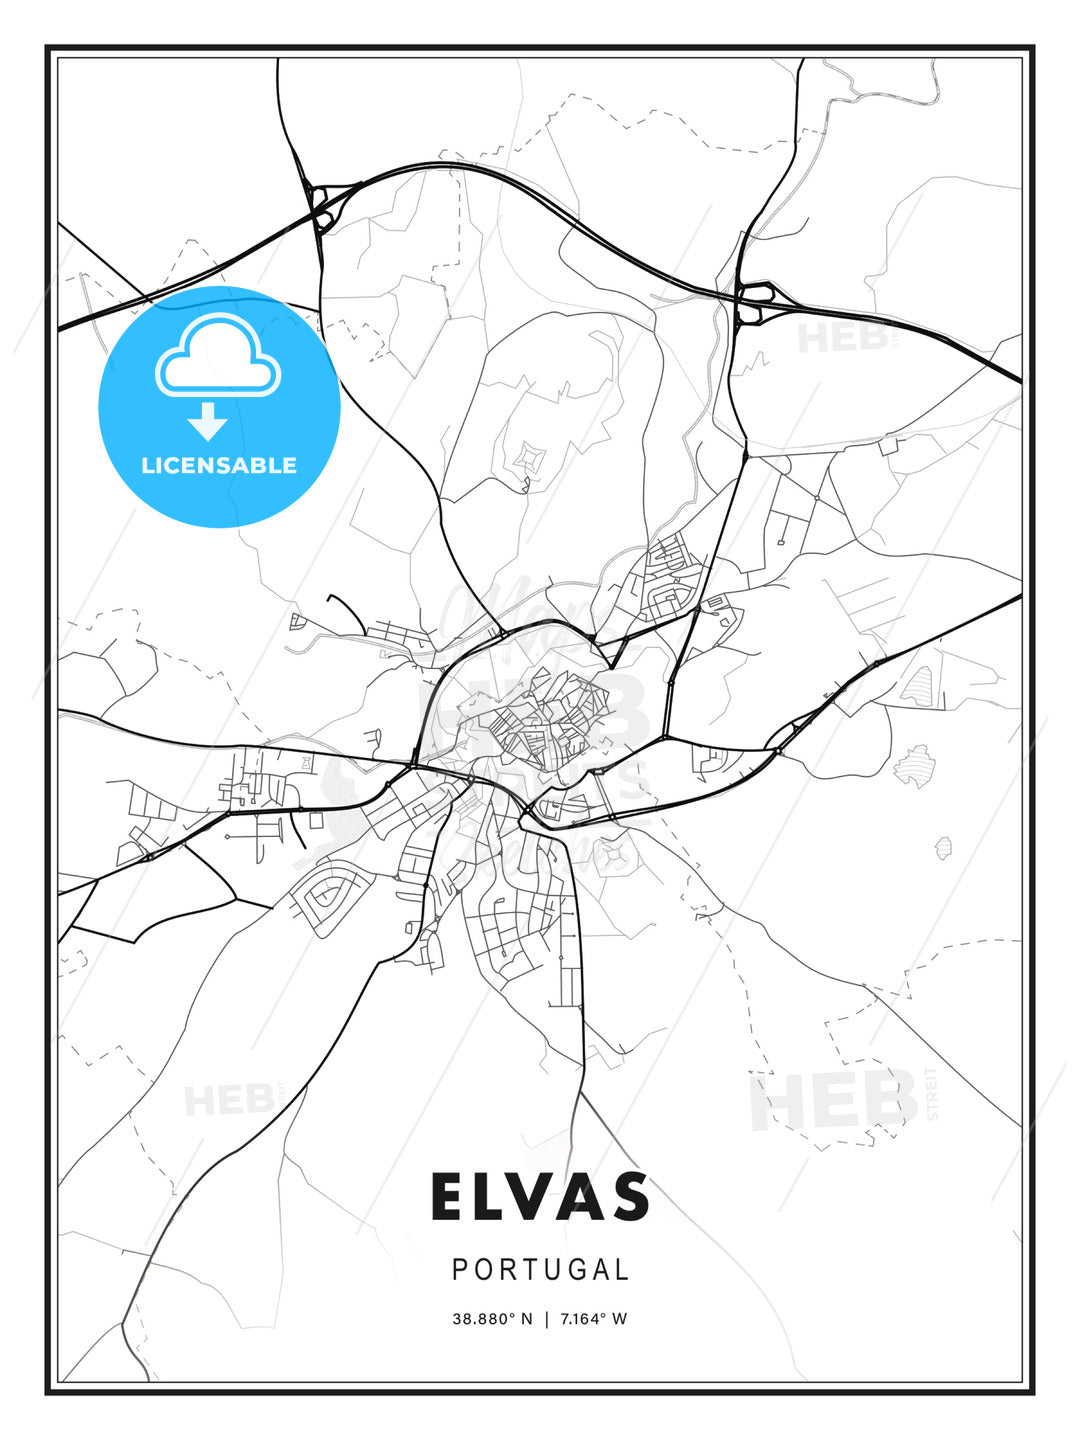 Elvas, Portugal, Modern Print Template in Various Formats - HEBSTREITS Sketches